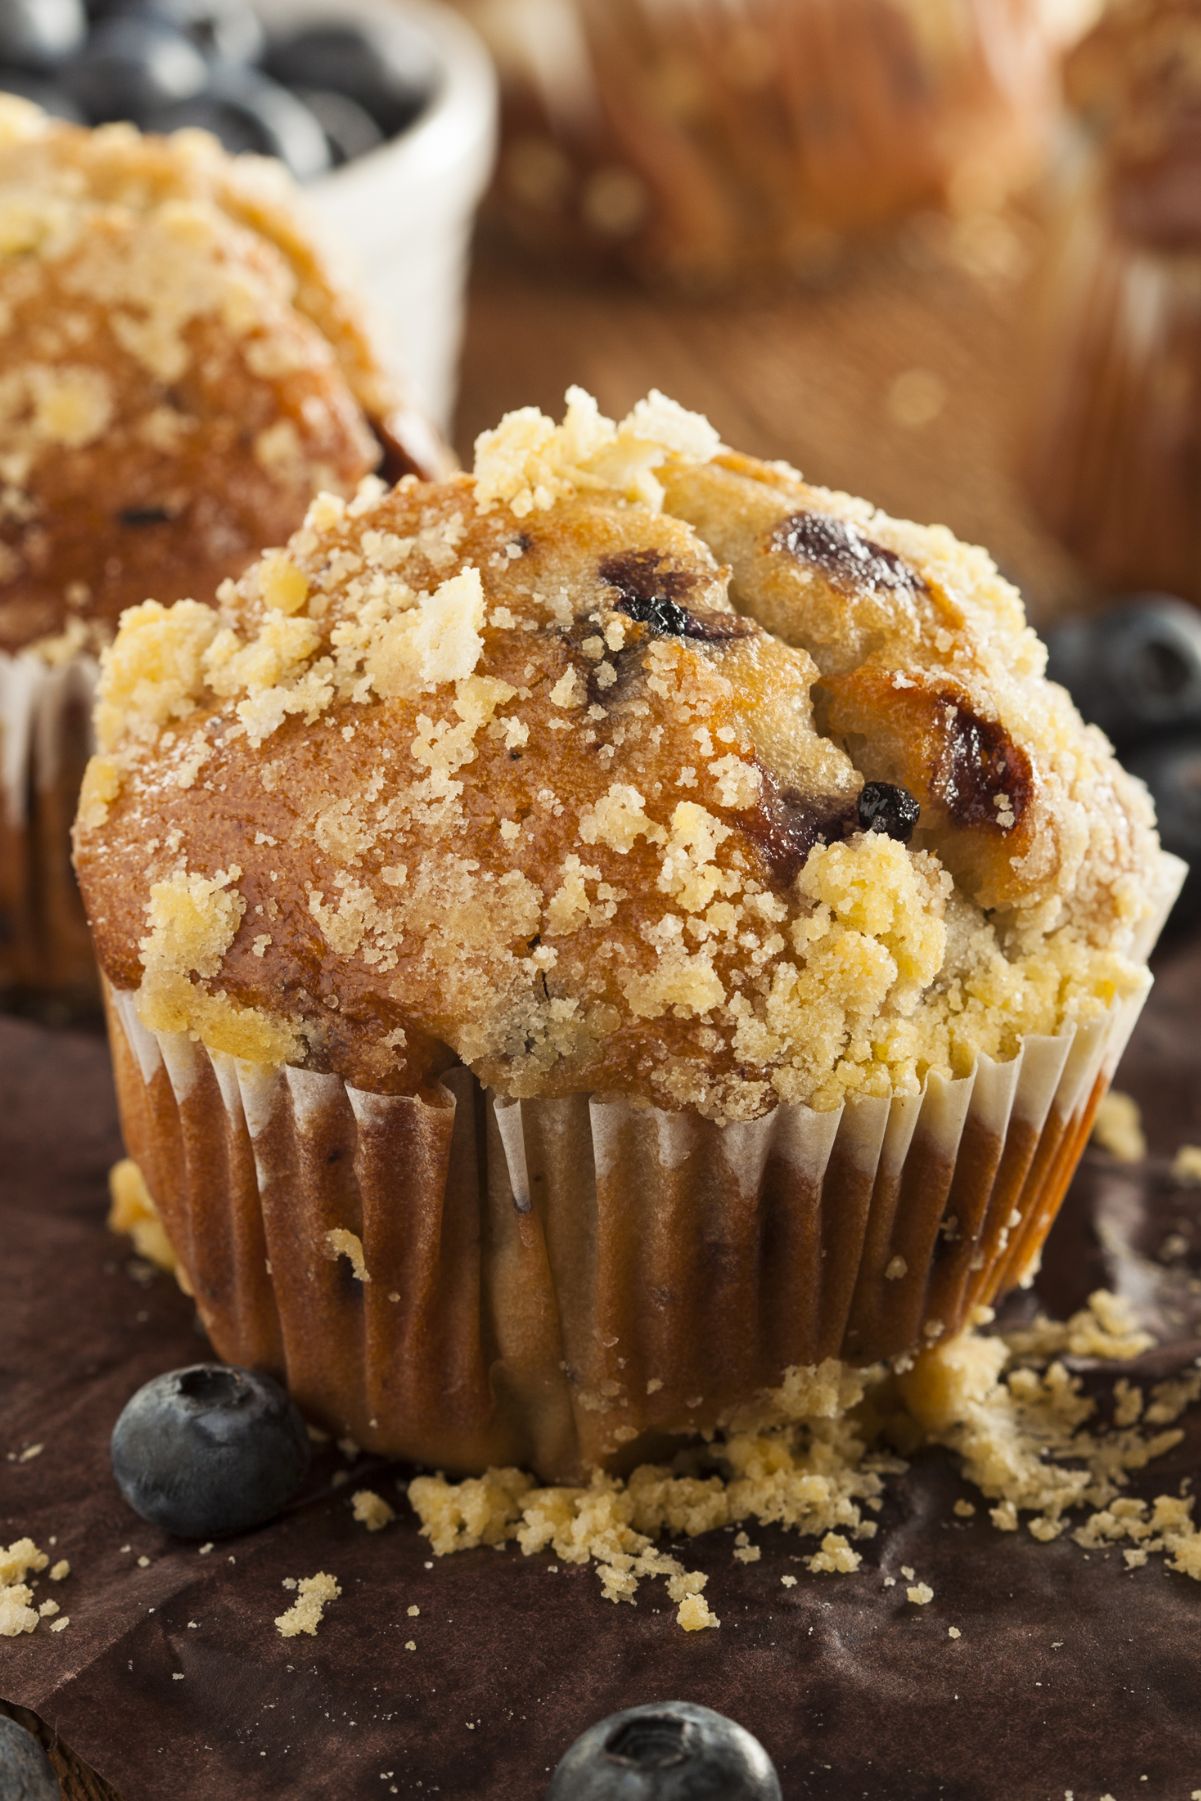 Closeup of Weight Watchers Blueberry Streusel Muffins on a wooden surface.